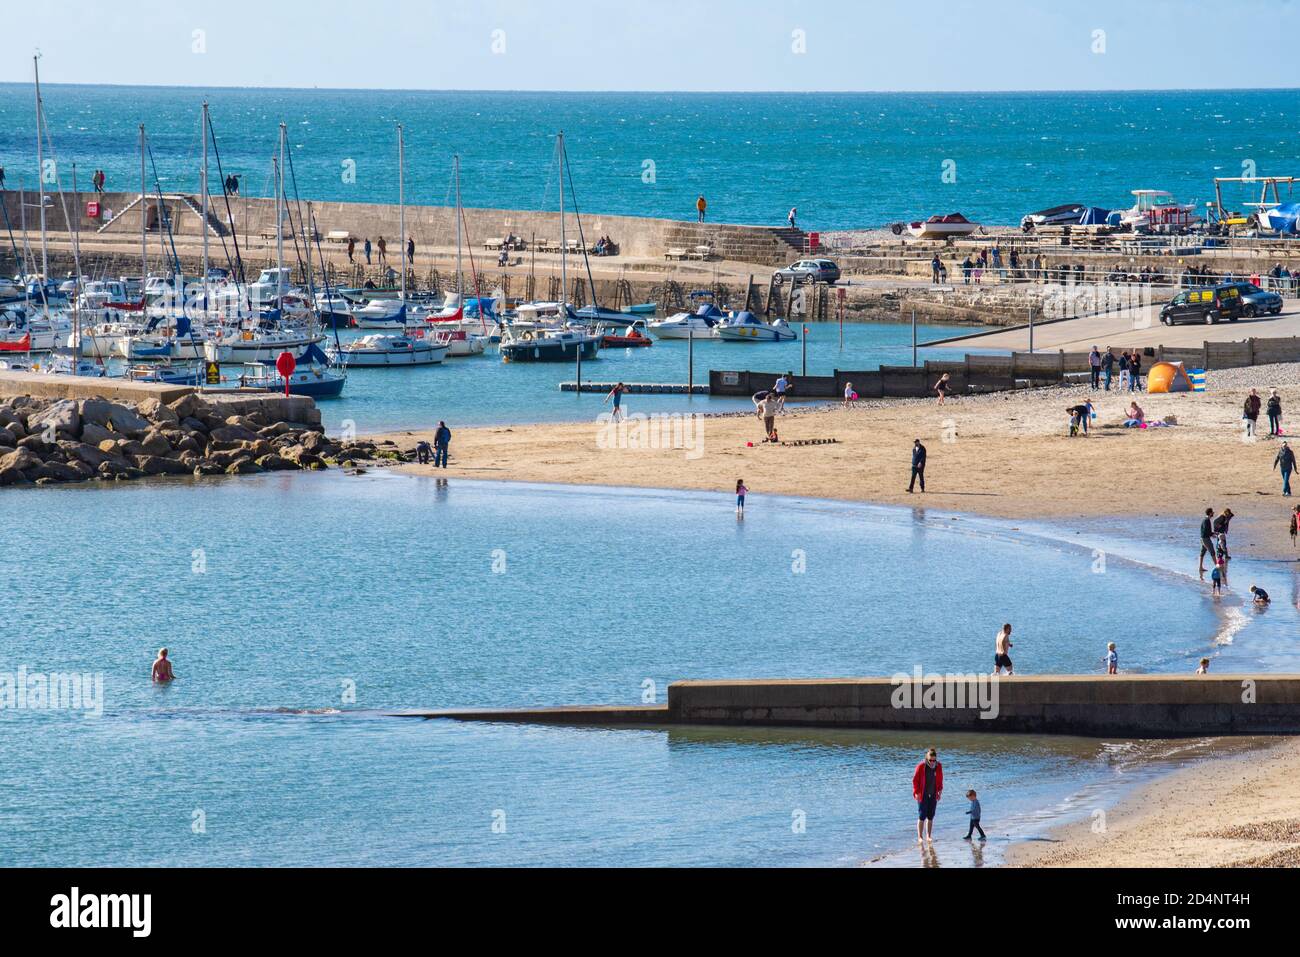 Lyme Regis, Dorset, UK. 9th Oct, 2020. UK Weather: Locals and visitors enjoy a bright and sunny start to the weekend at the seaside resort of Lyme Regis. Credit: Celia McMahon/Alamy Live News Stock Photo